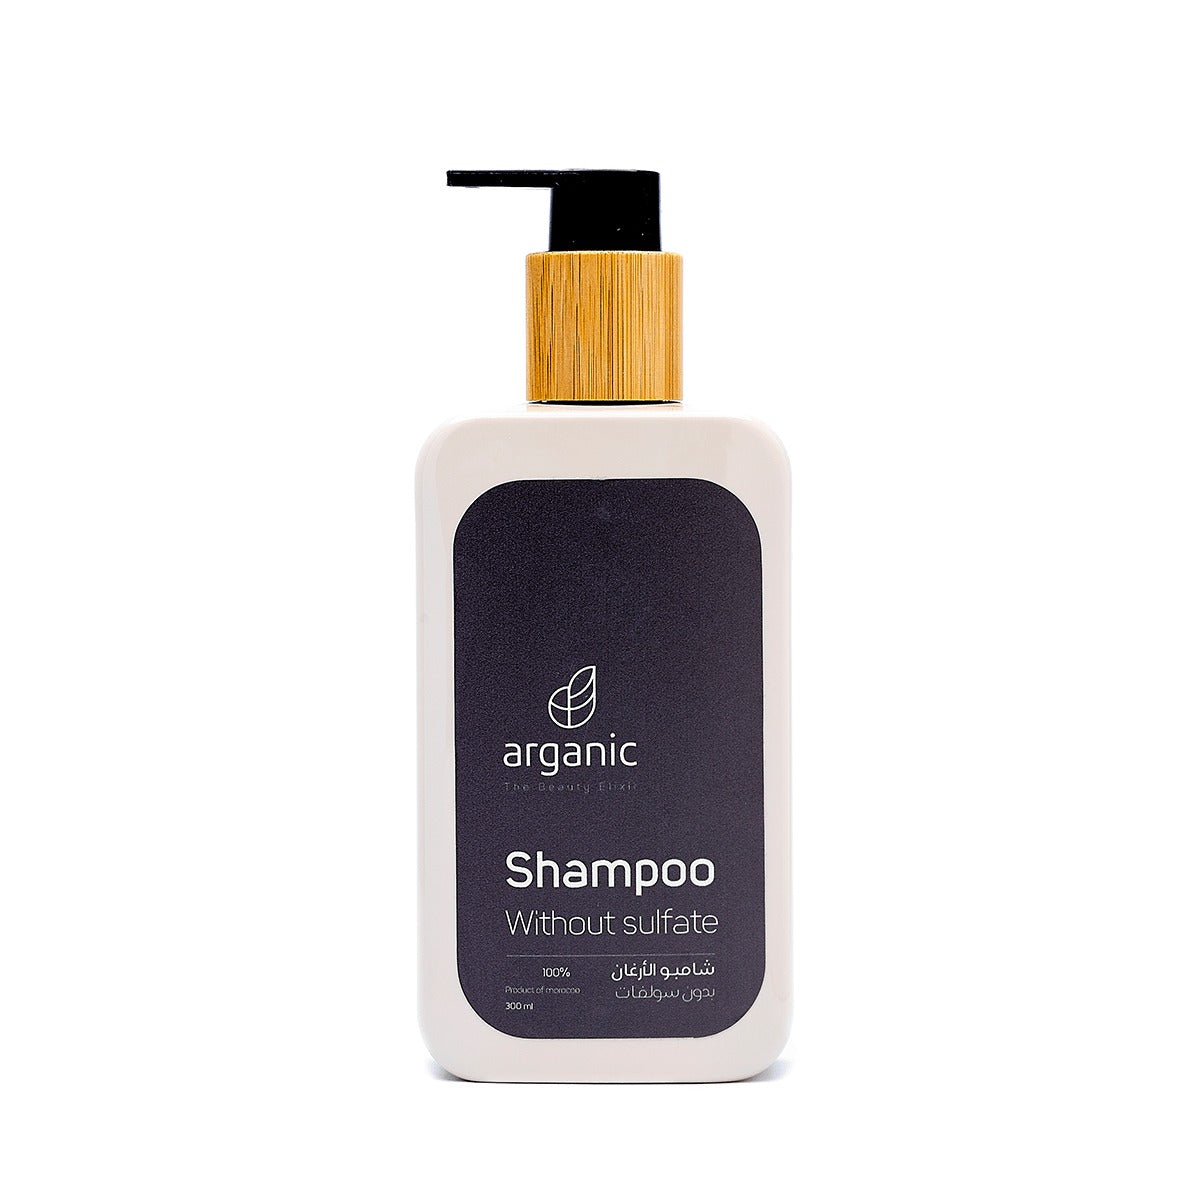 Sulfate-free shampoo bottle from Arganic with simple design